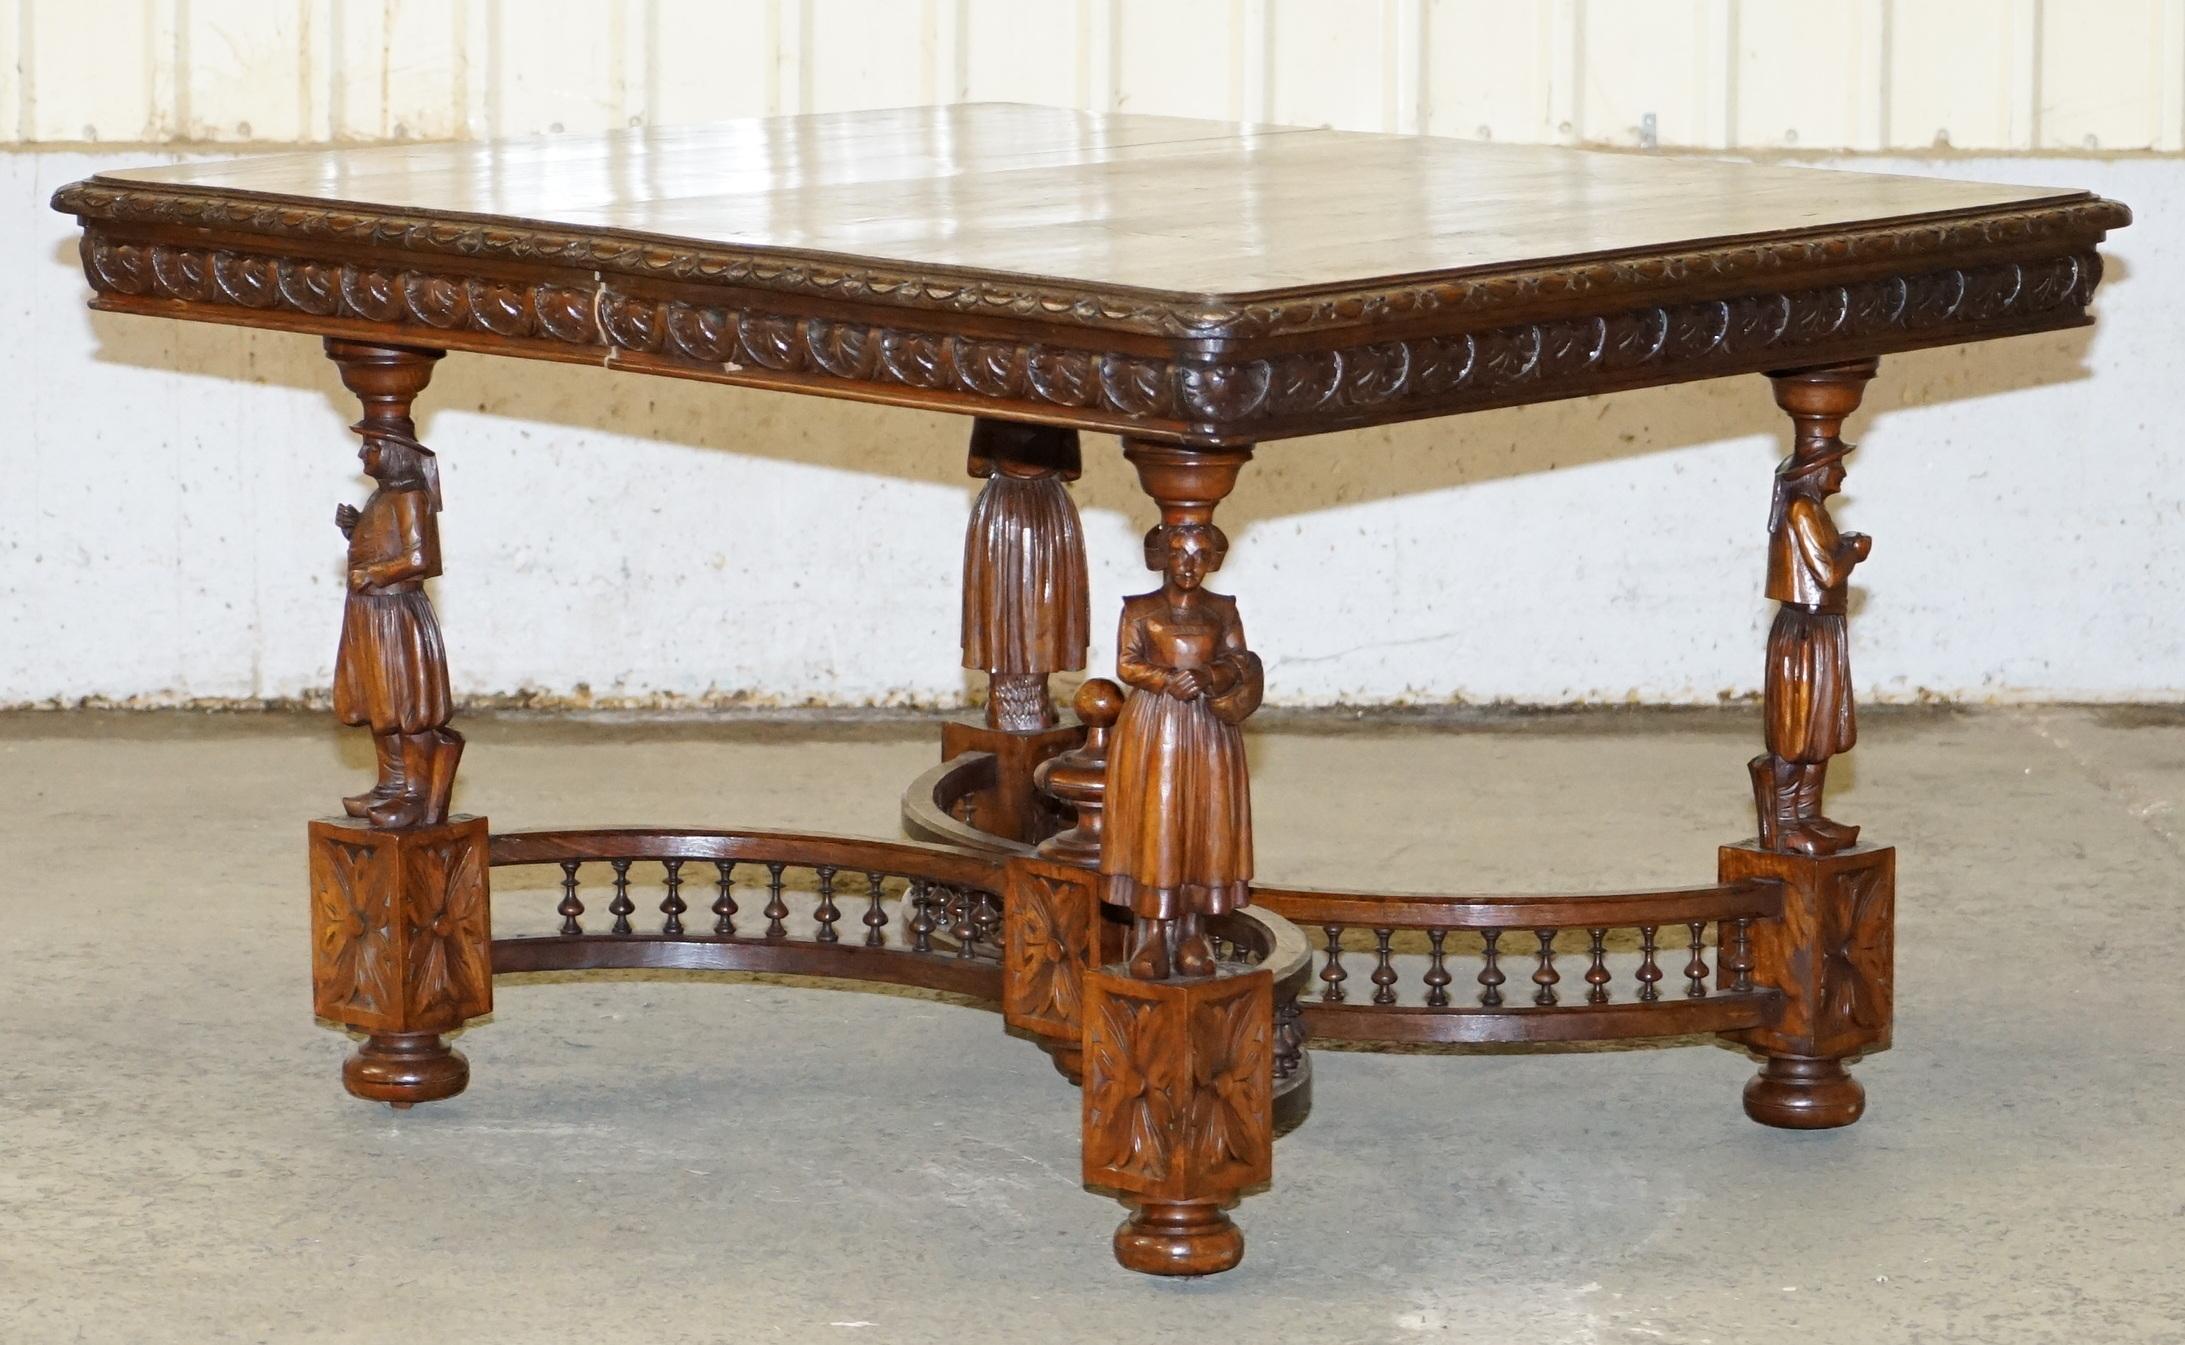 We are delighted to offer for sale this very rare original circa 1880 French Brittany hand carved solid Chestnut wood extending dining table

A very good look and rare extending antique French dining table. This piece is exceptionally decorative,